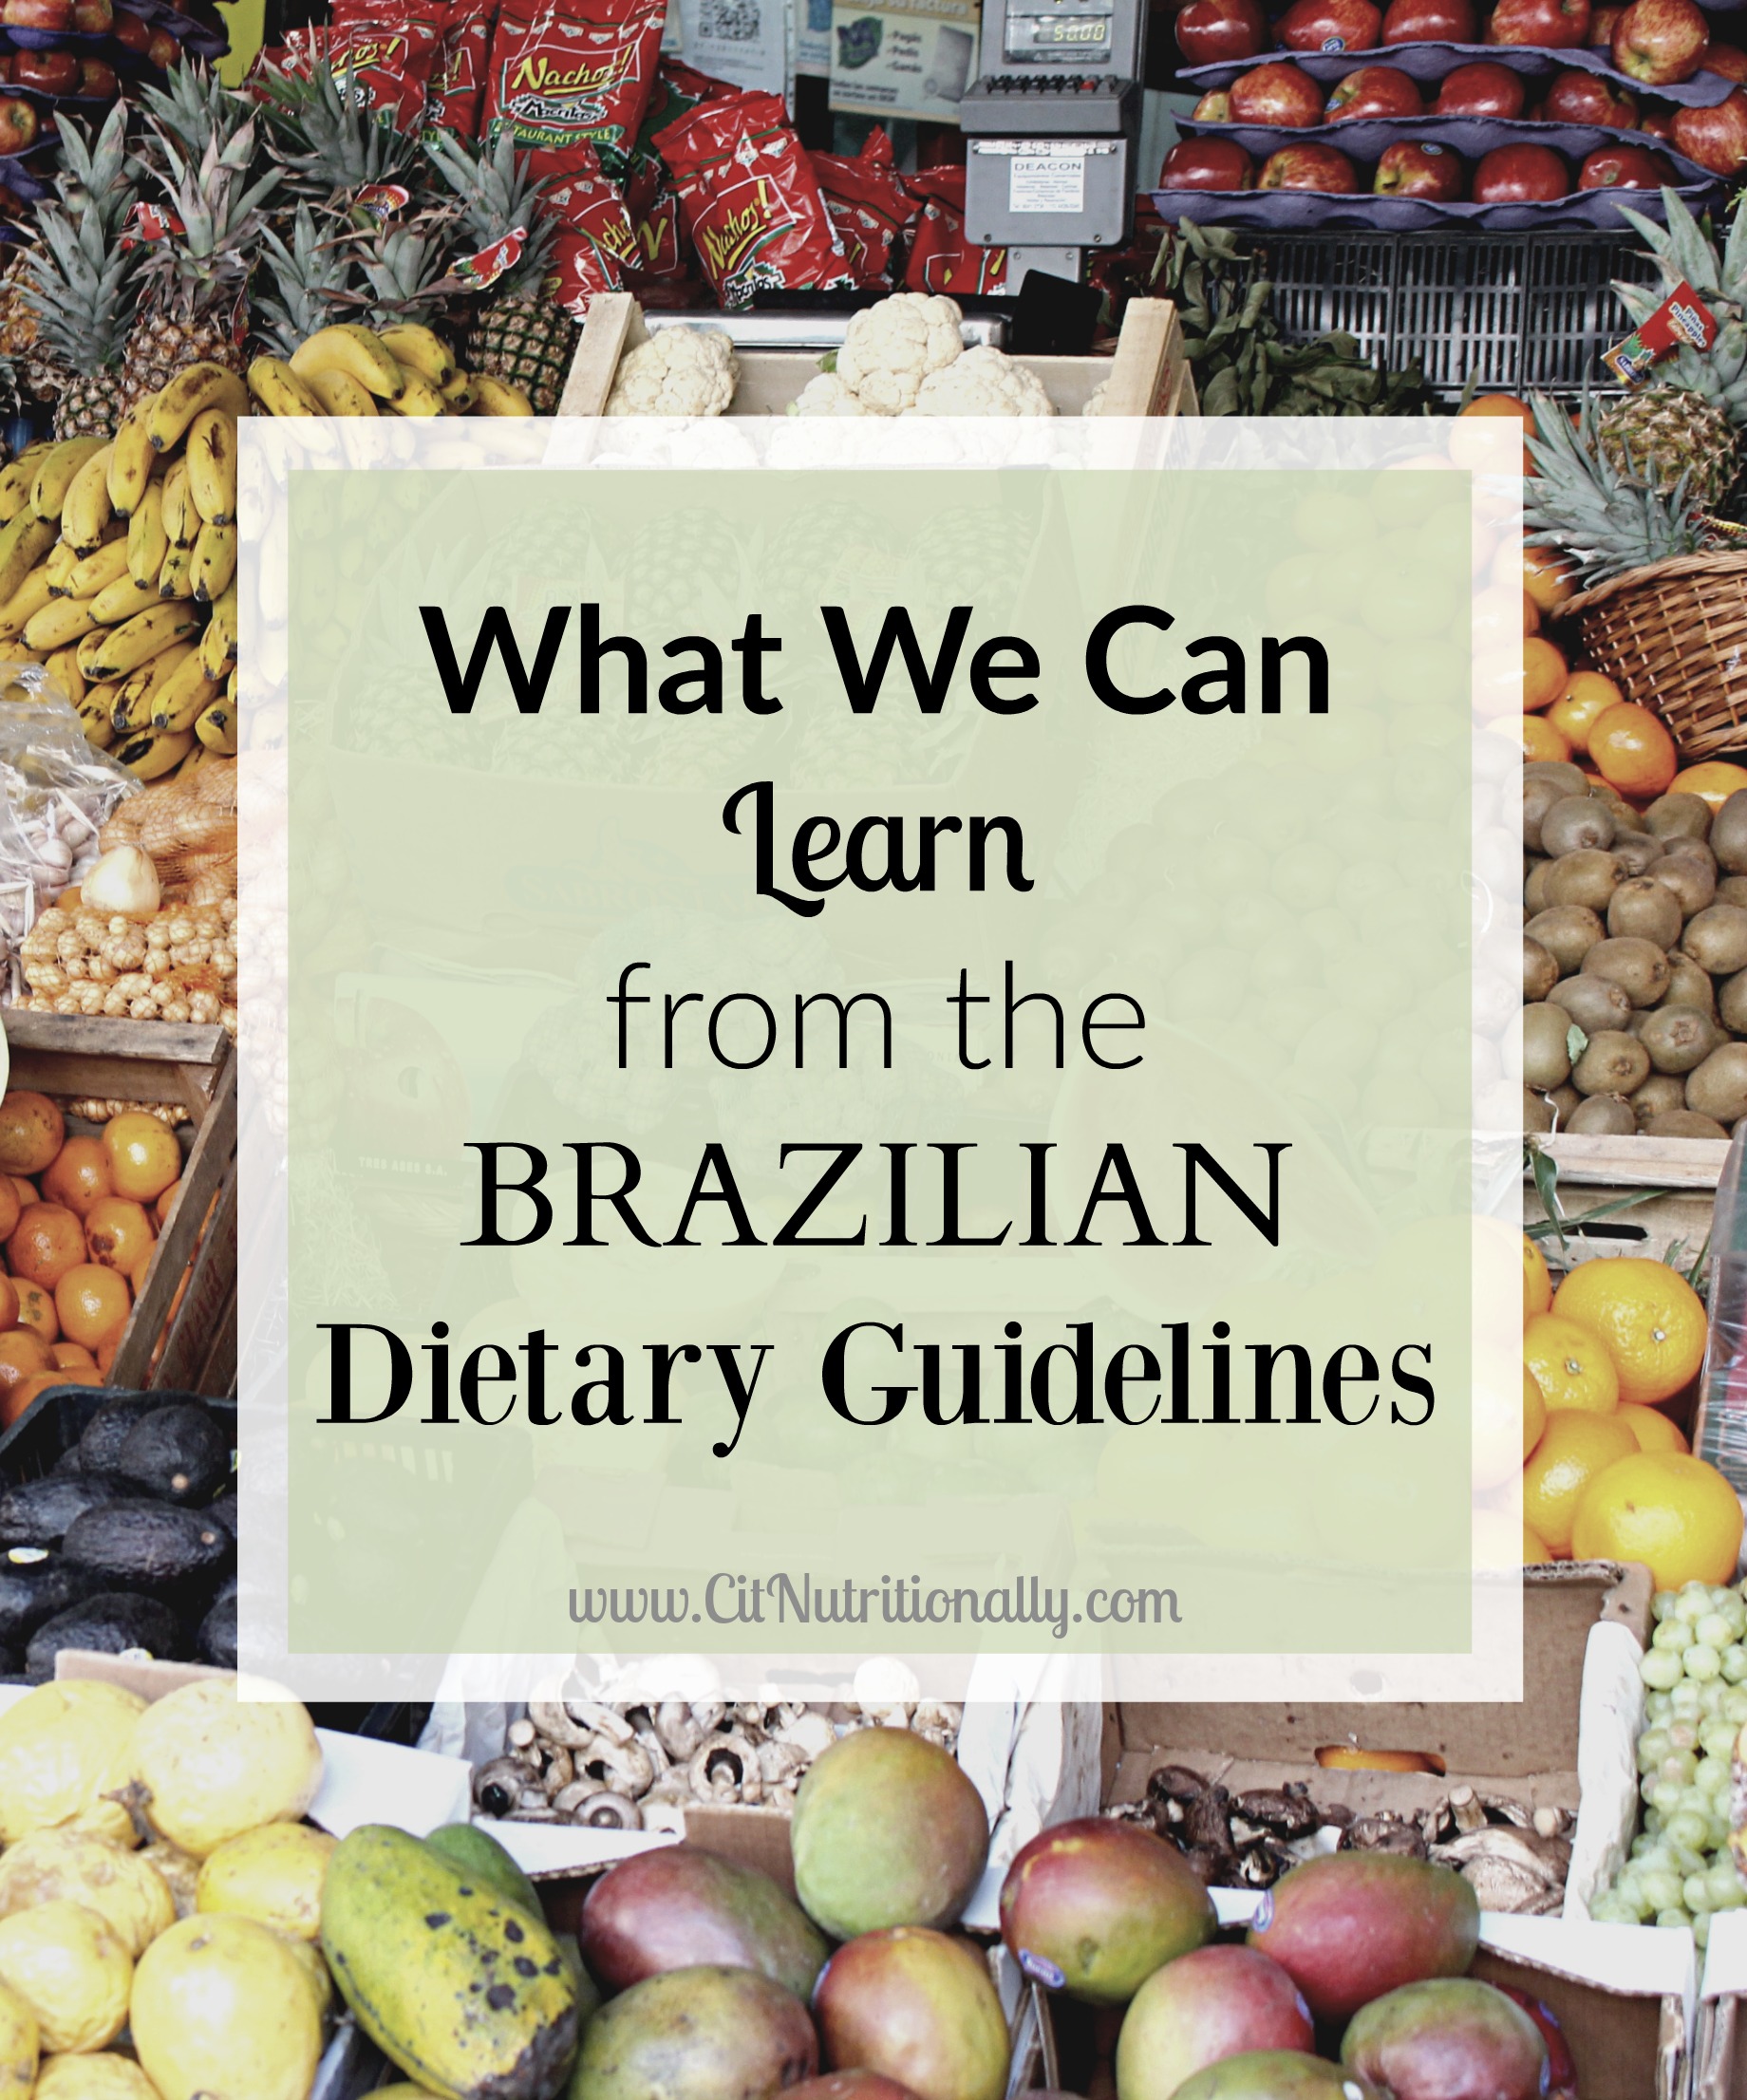 What We Can Learn From the Brazilian Dietary Guidelines | C it Nutritionally #healthy #health #nutrition